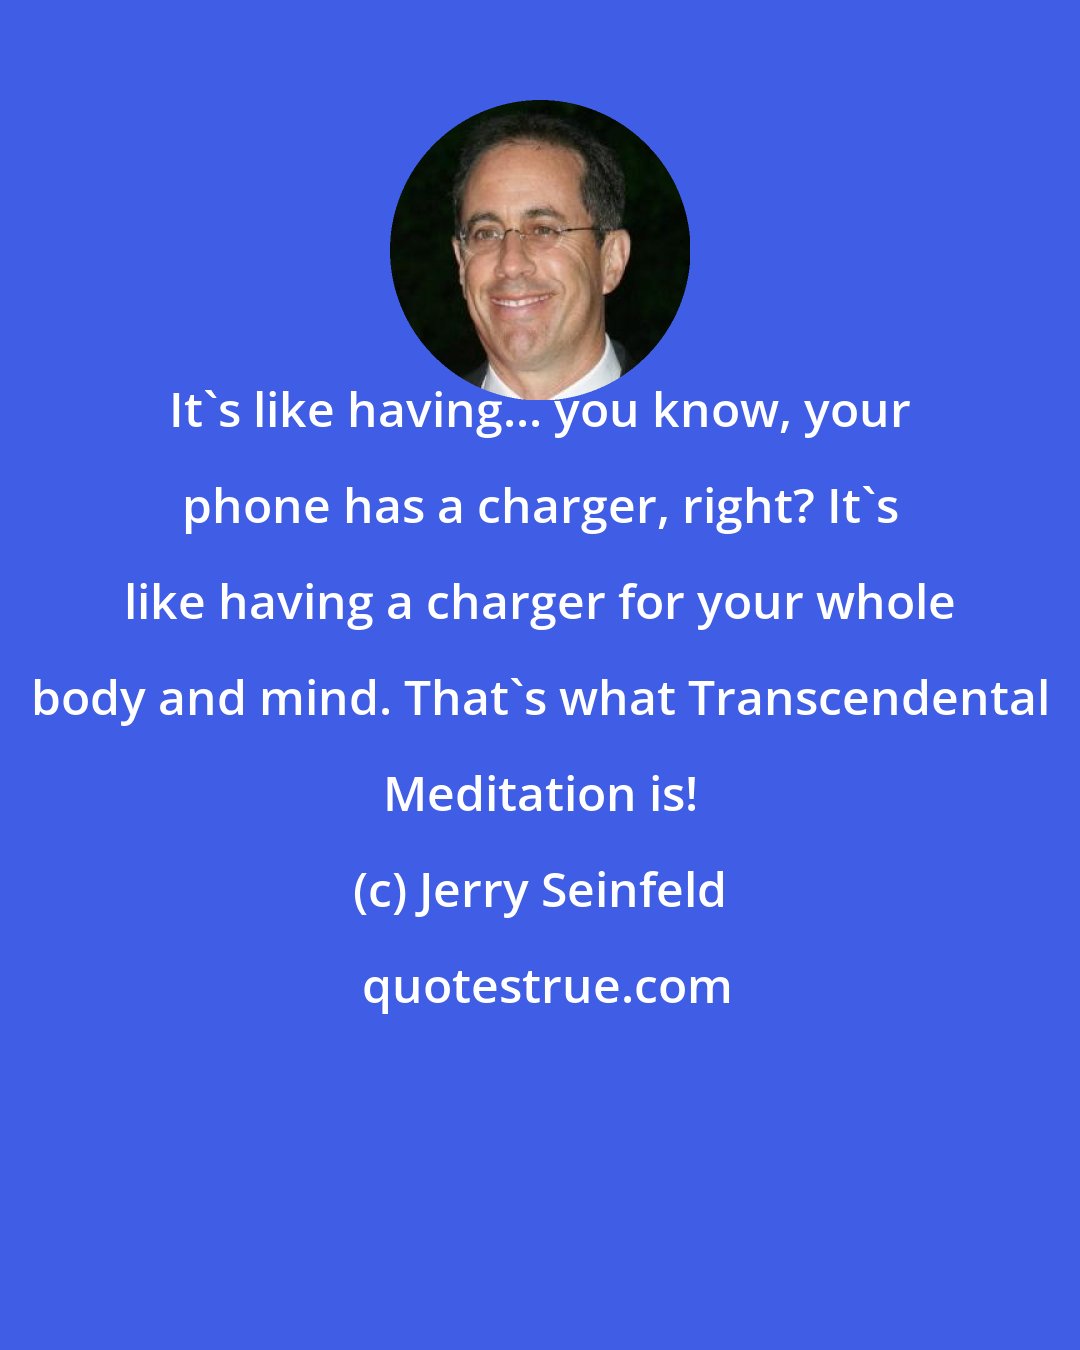 Jerry Seinfeld: It's like having... you know, your phone has a charger, right? It's like having a charger for your whole body and mind. That's what Transcendental Meditation is!